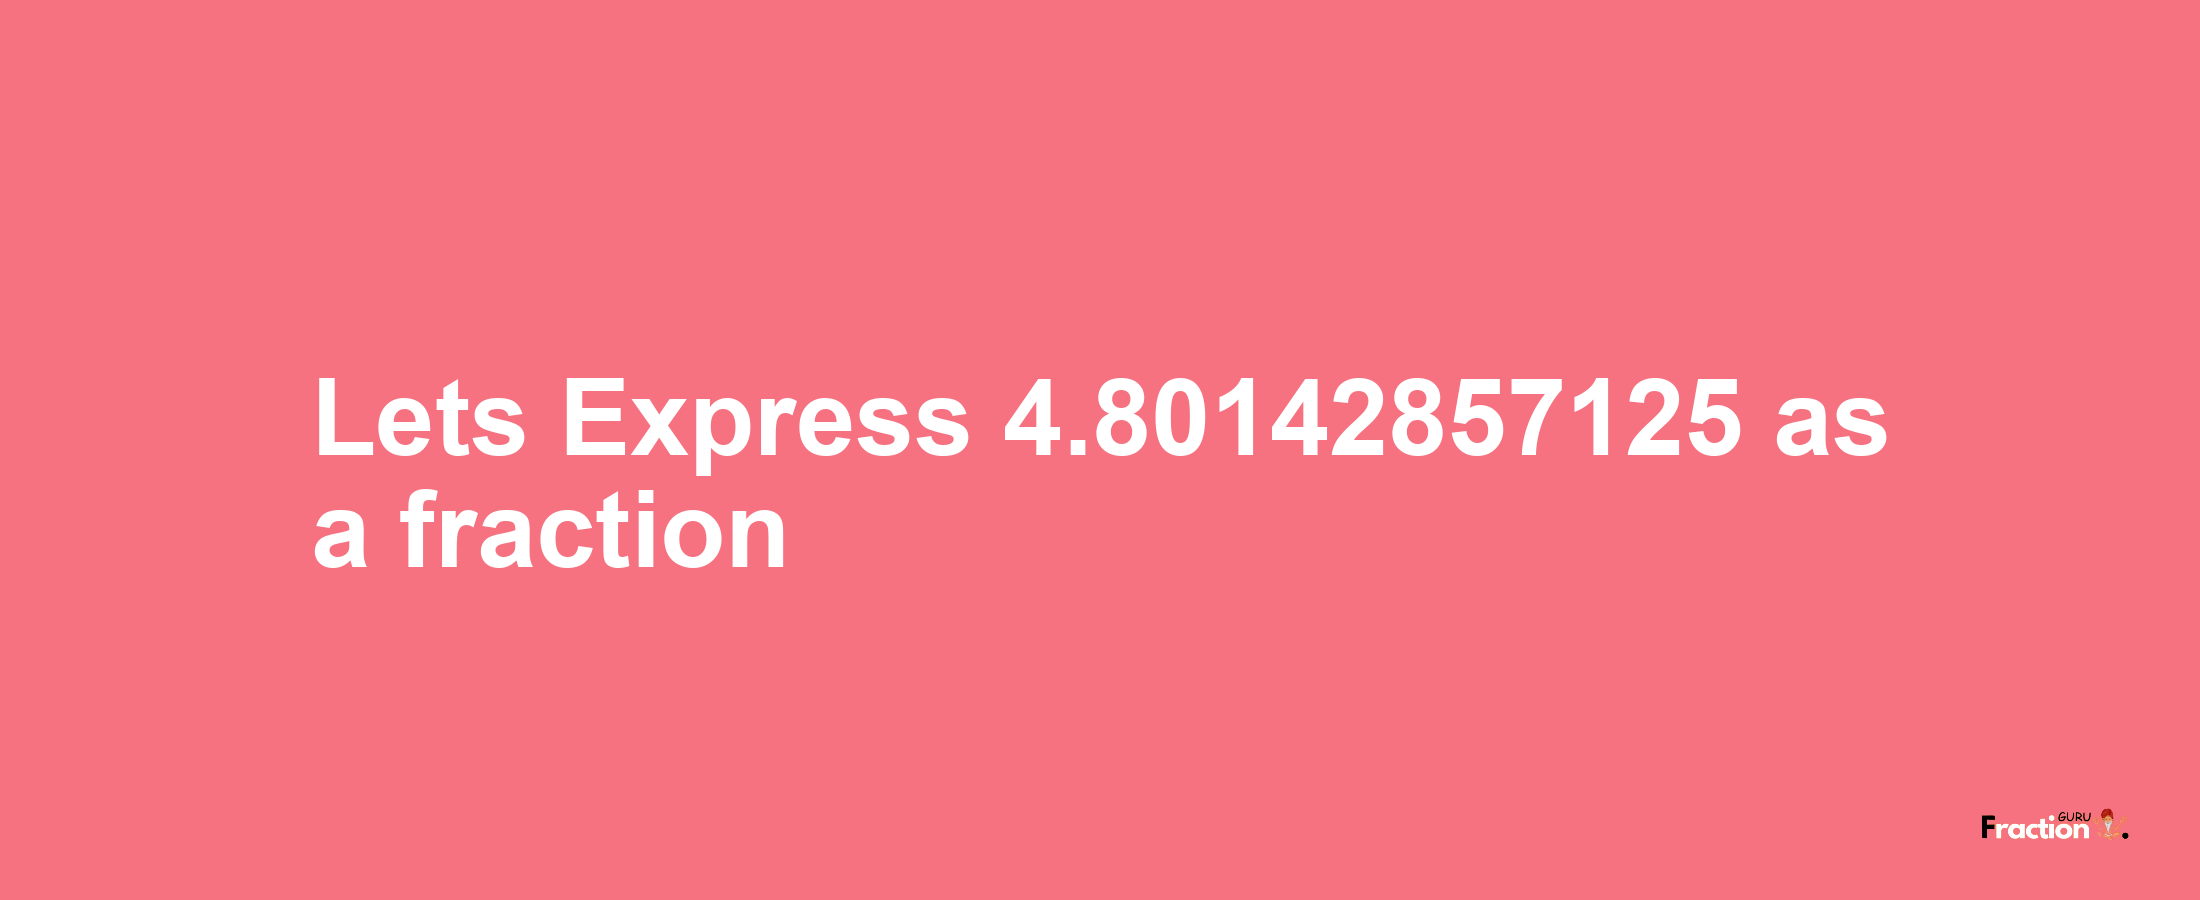 Lets Express 4.80142857125 as afraction